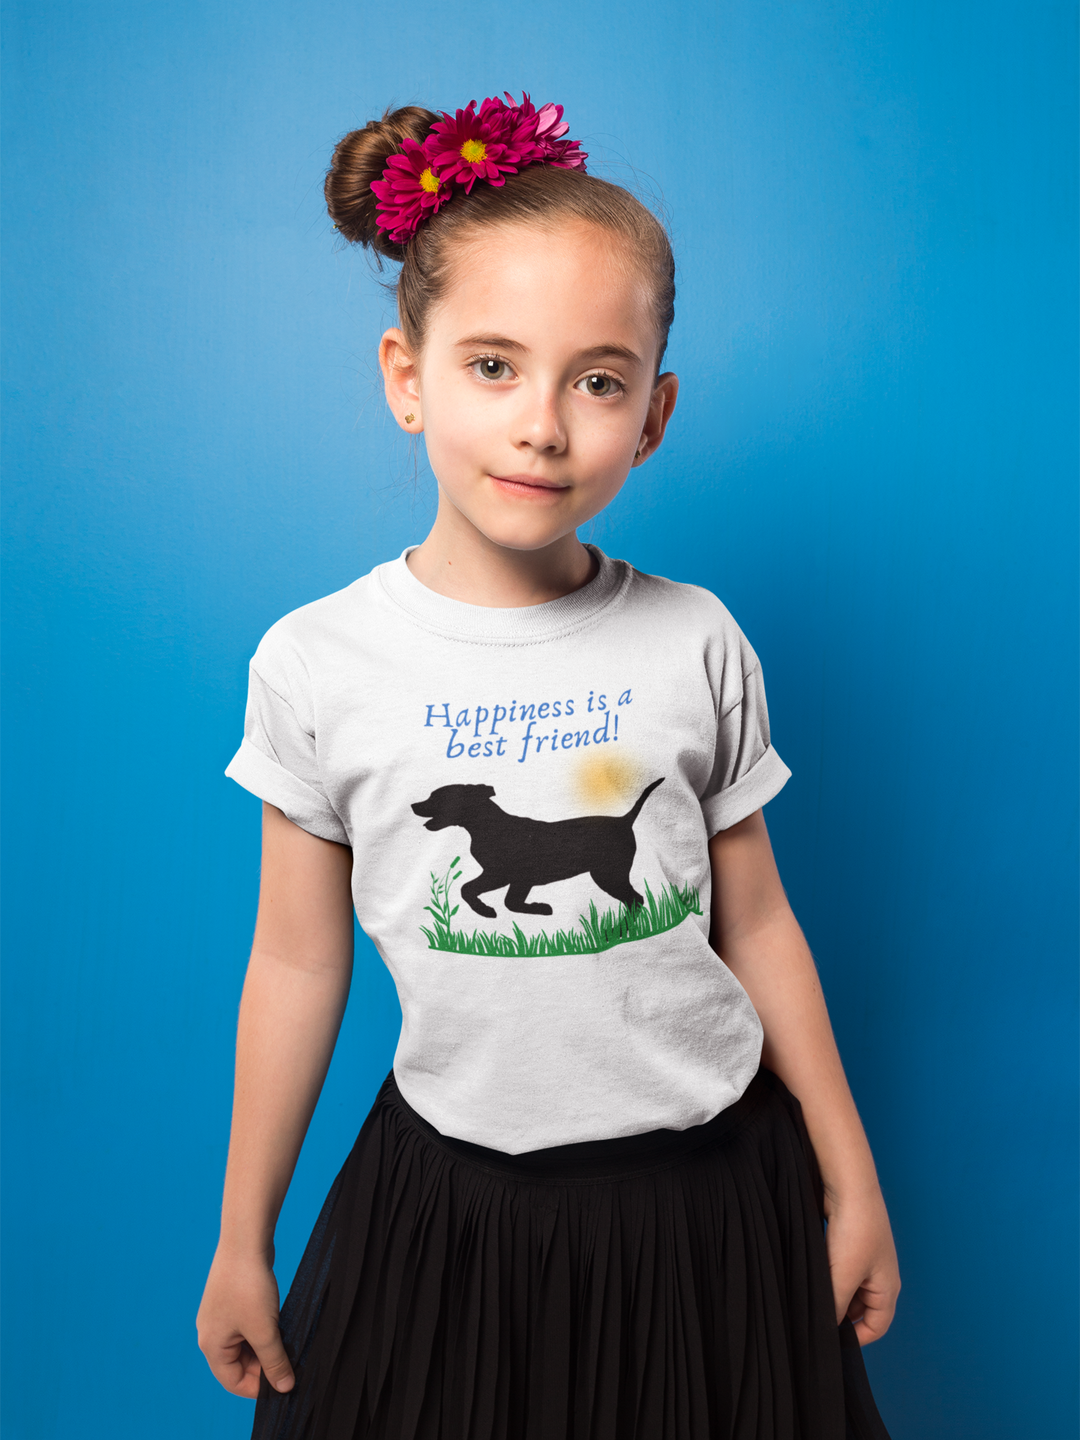 Happiness is having a best friend, I. Short sleeve t shirt for toddler and kids. - TeesForToddlersandKids -  t-shirt - seasons, summer - happiness-is-having-a-best-friend-short-sleeve-t-shirt-for-toddler-and-kids